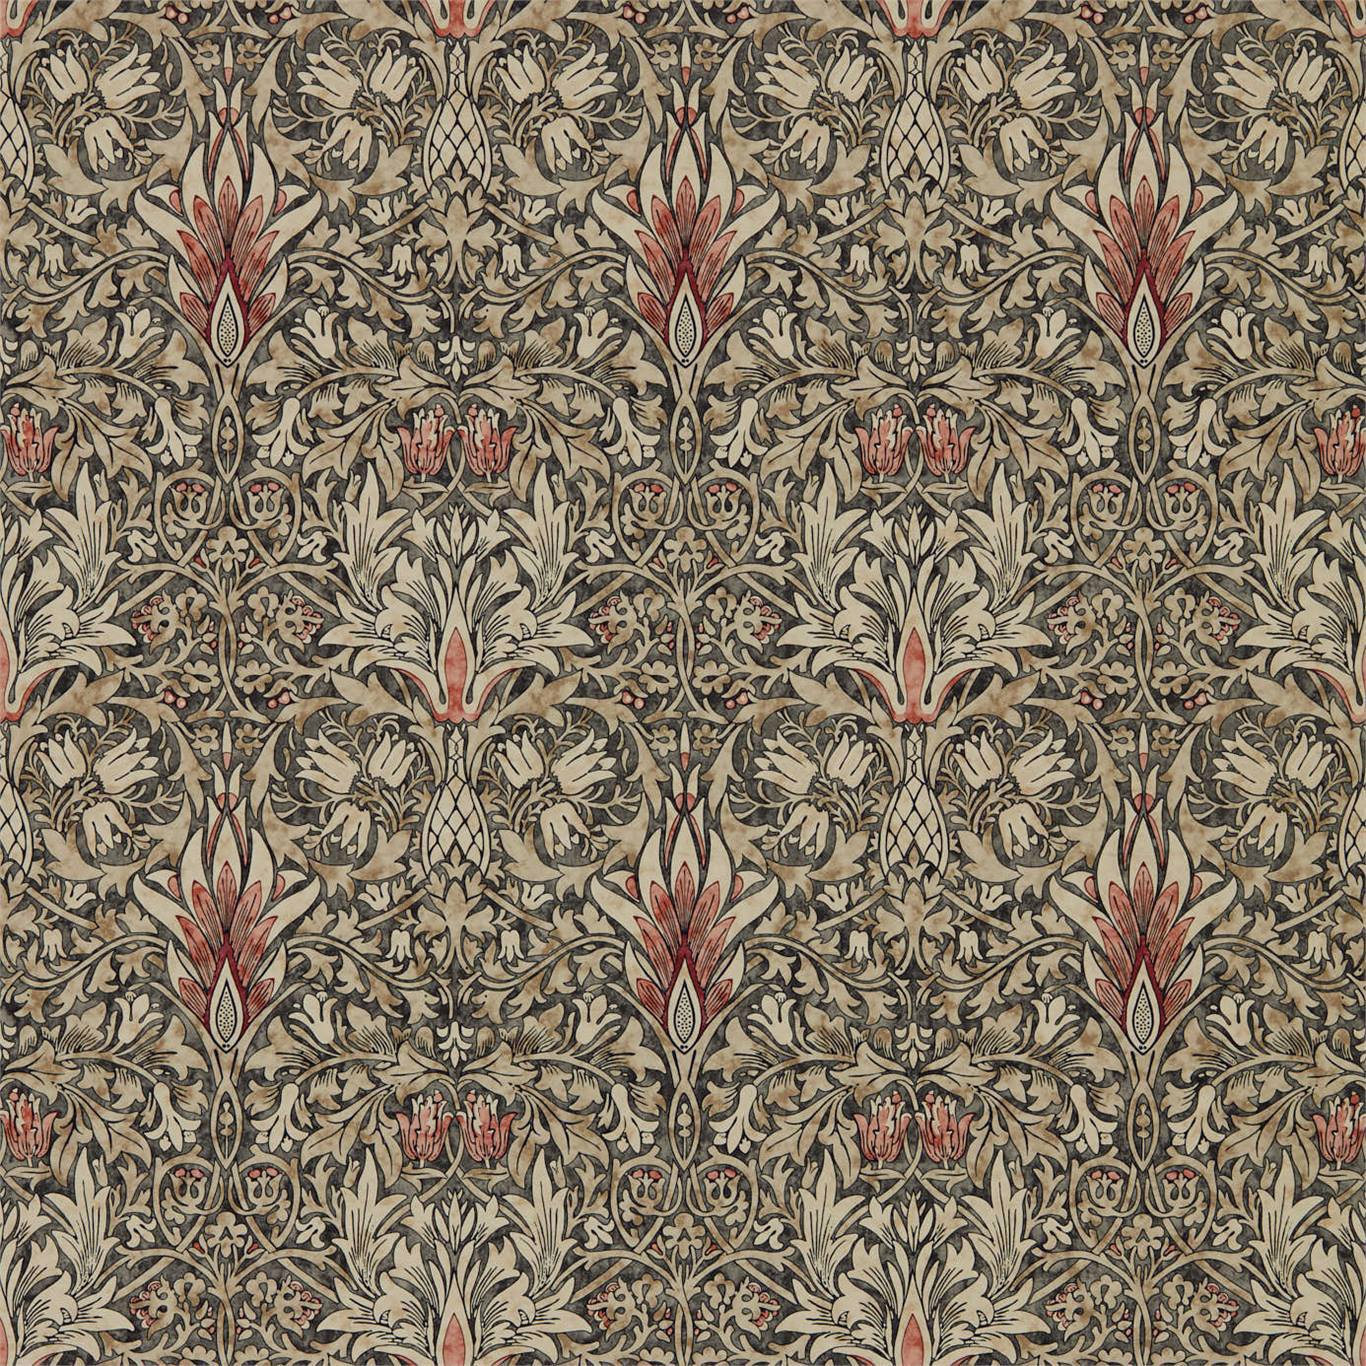 Snakeshead Charcoal/Spice Wallpaper DCMW216870 by Morris & Co